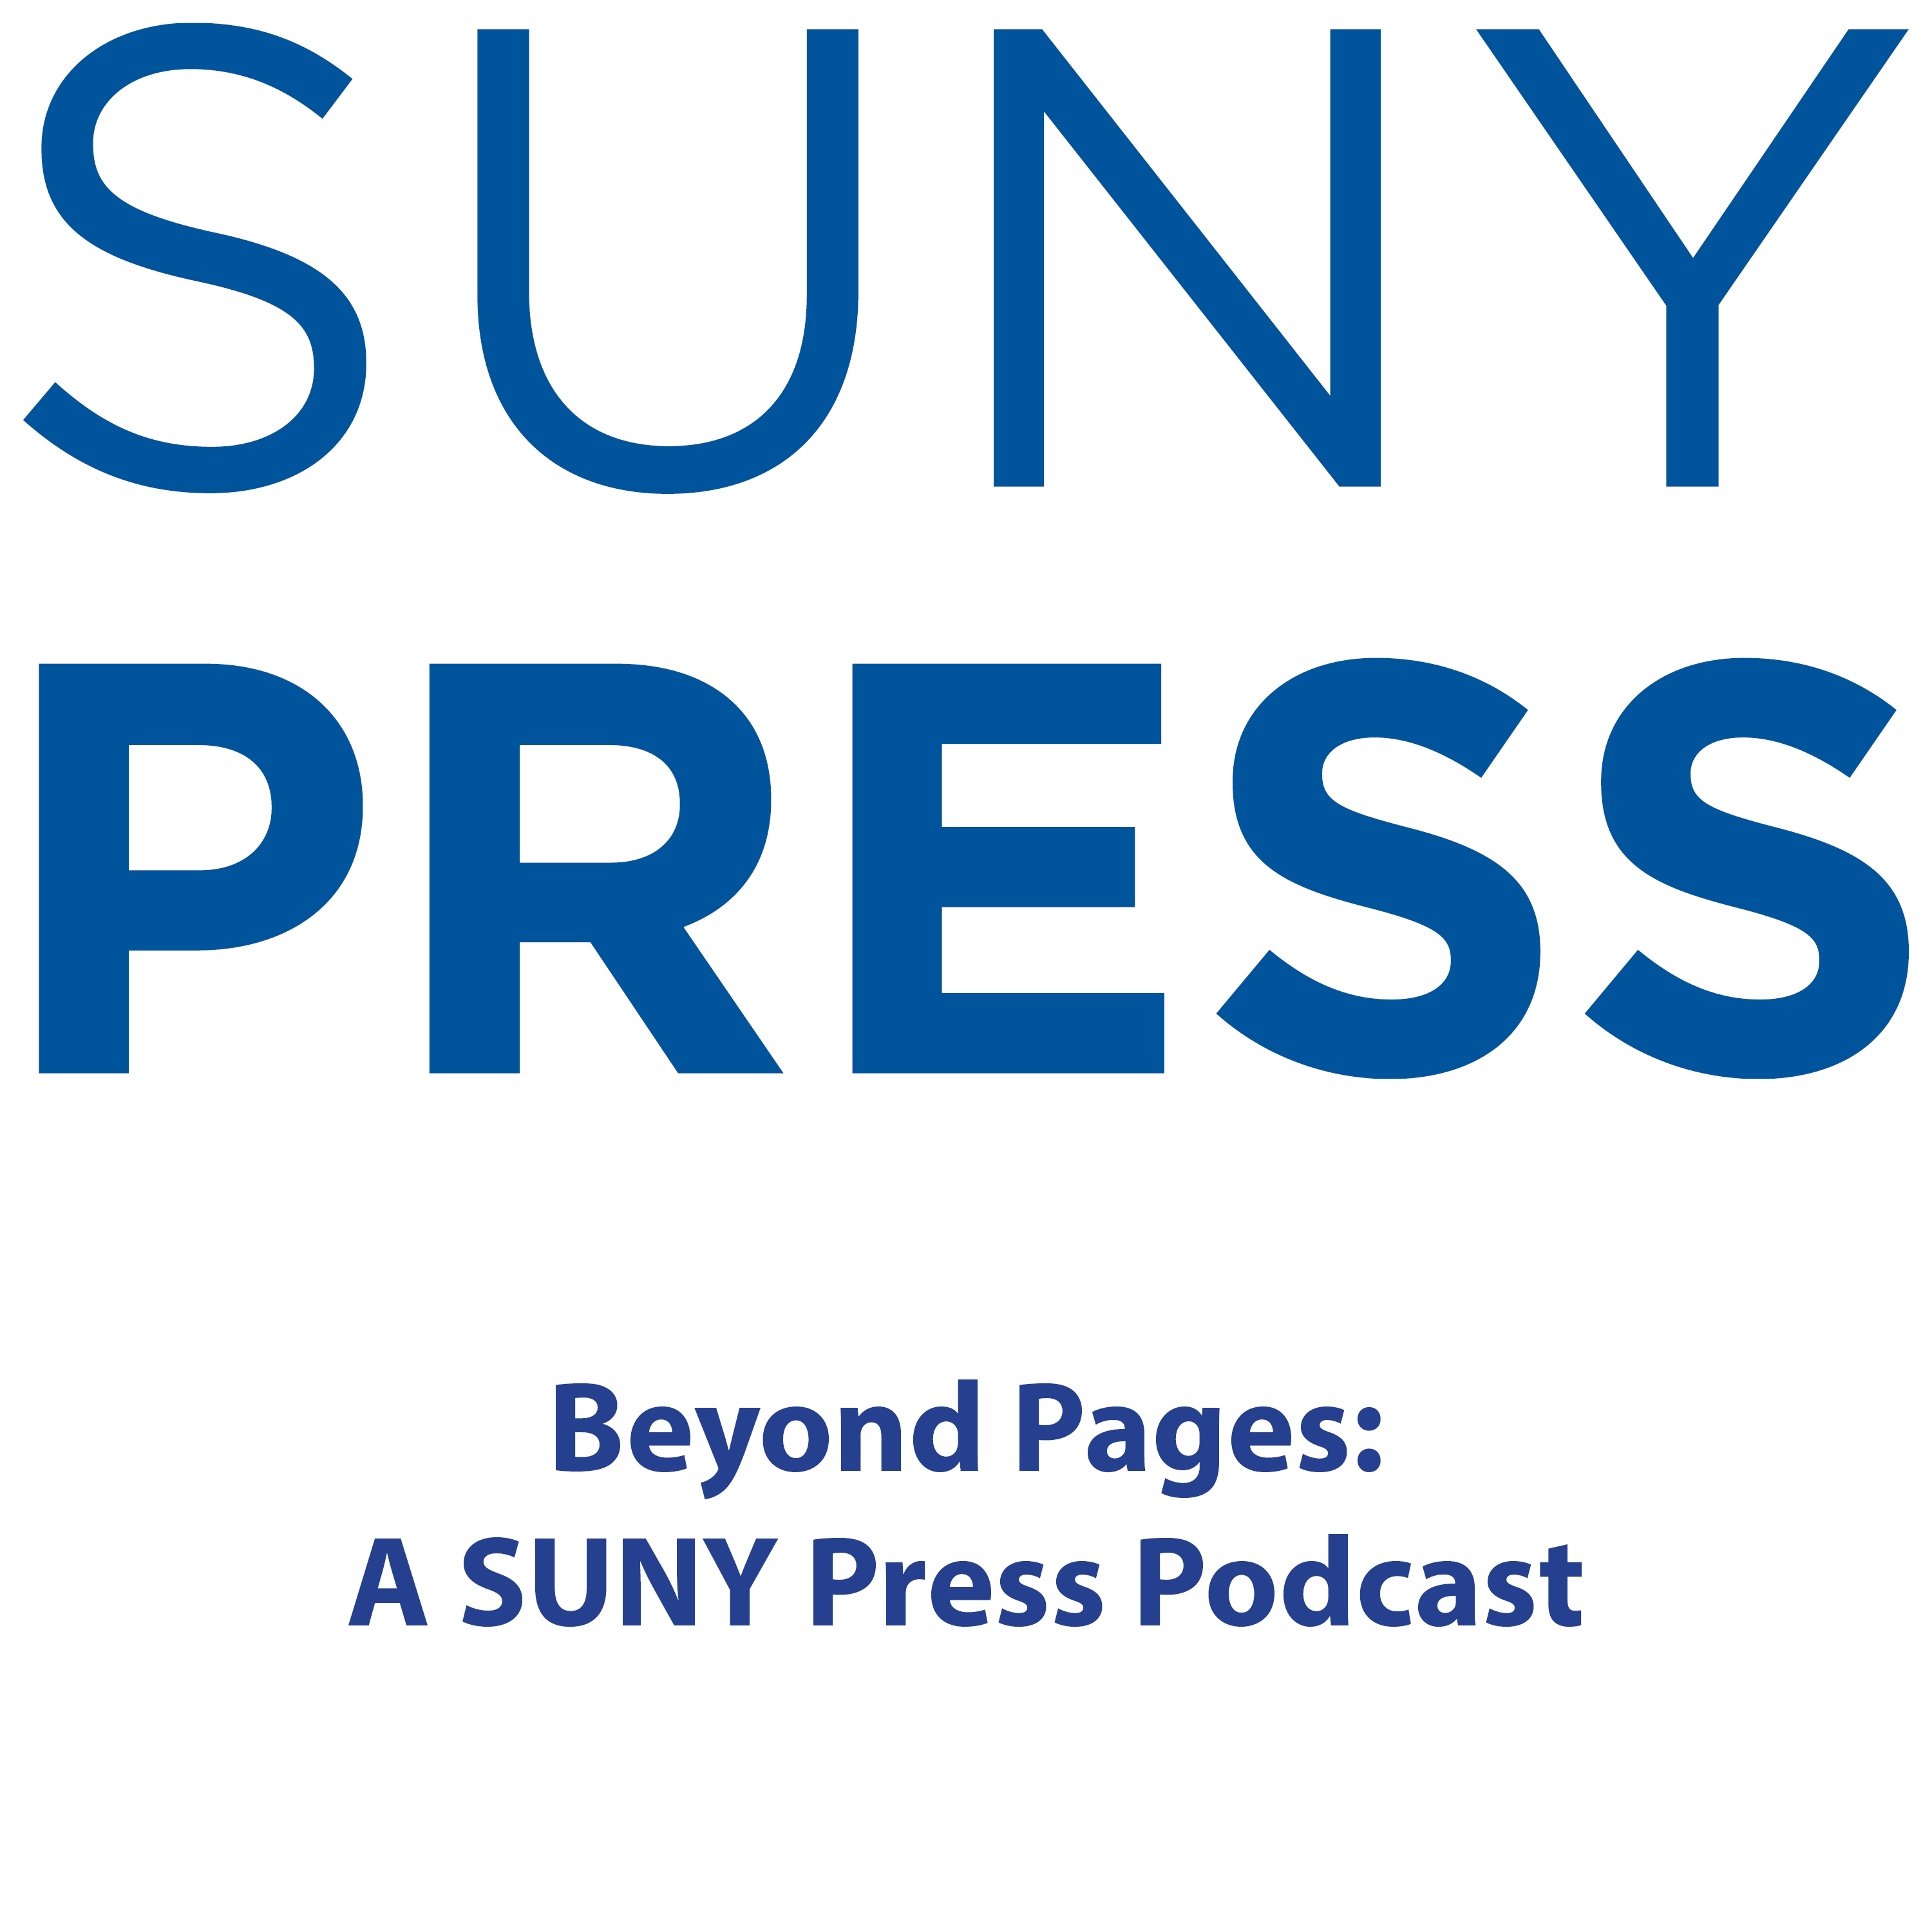 Beyond Pages: A SUNY Press Podcast